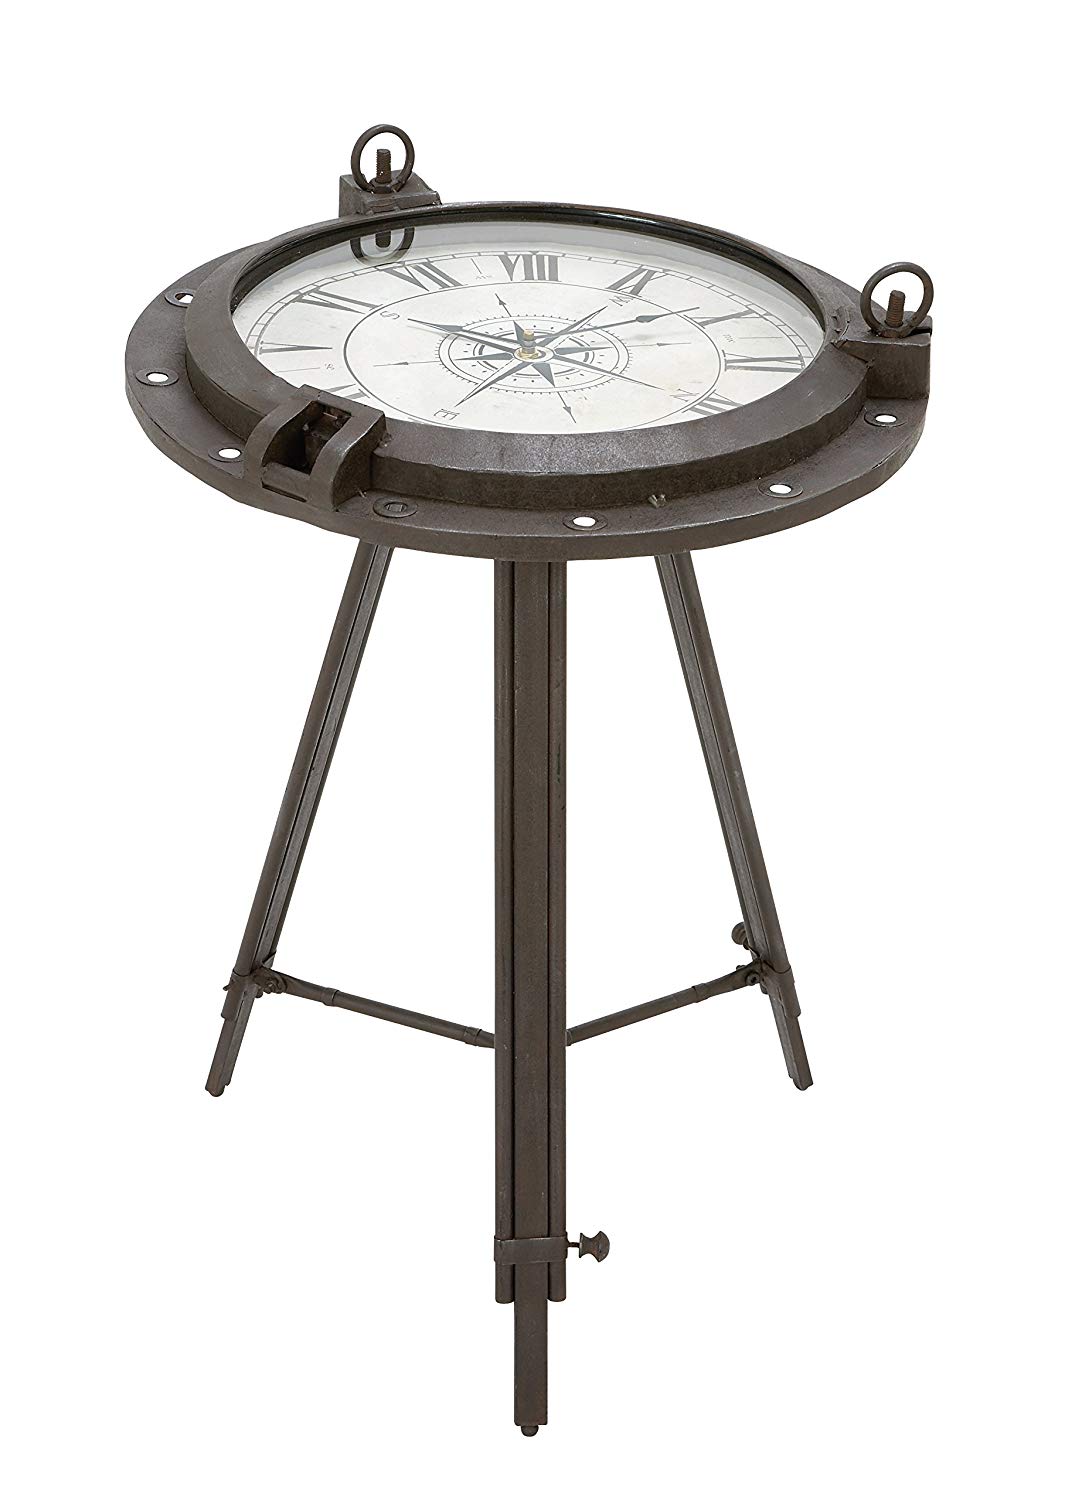 deco metal clock table inch home kitchen carmen accent pier one frames danish dining tables small silver lamps seat cushions multi colored end carpet cover strip pottery barn